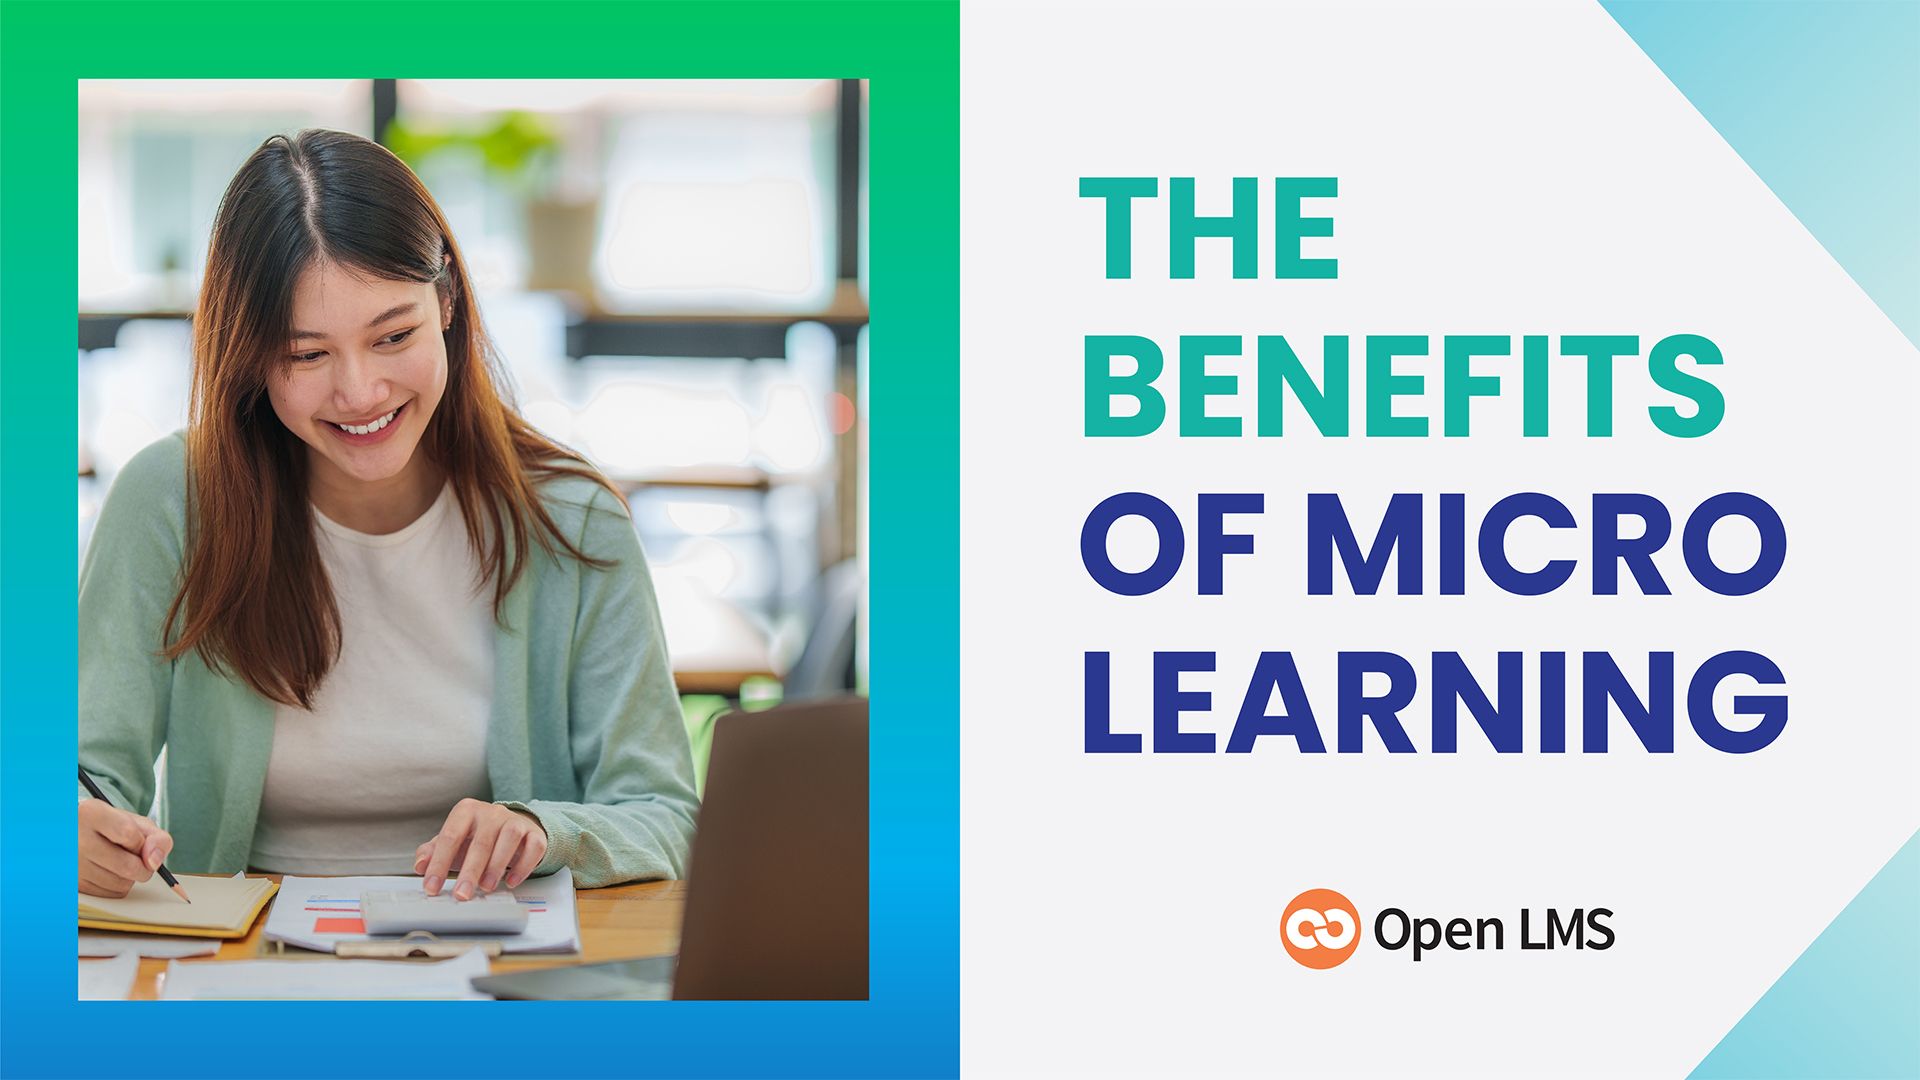 The Benefits of Microlearning: 8 Minutes to Make an Impact